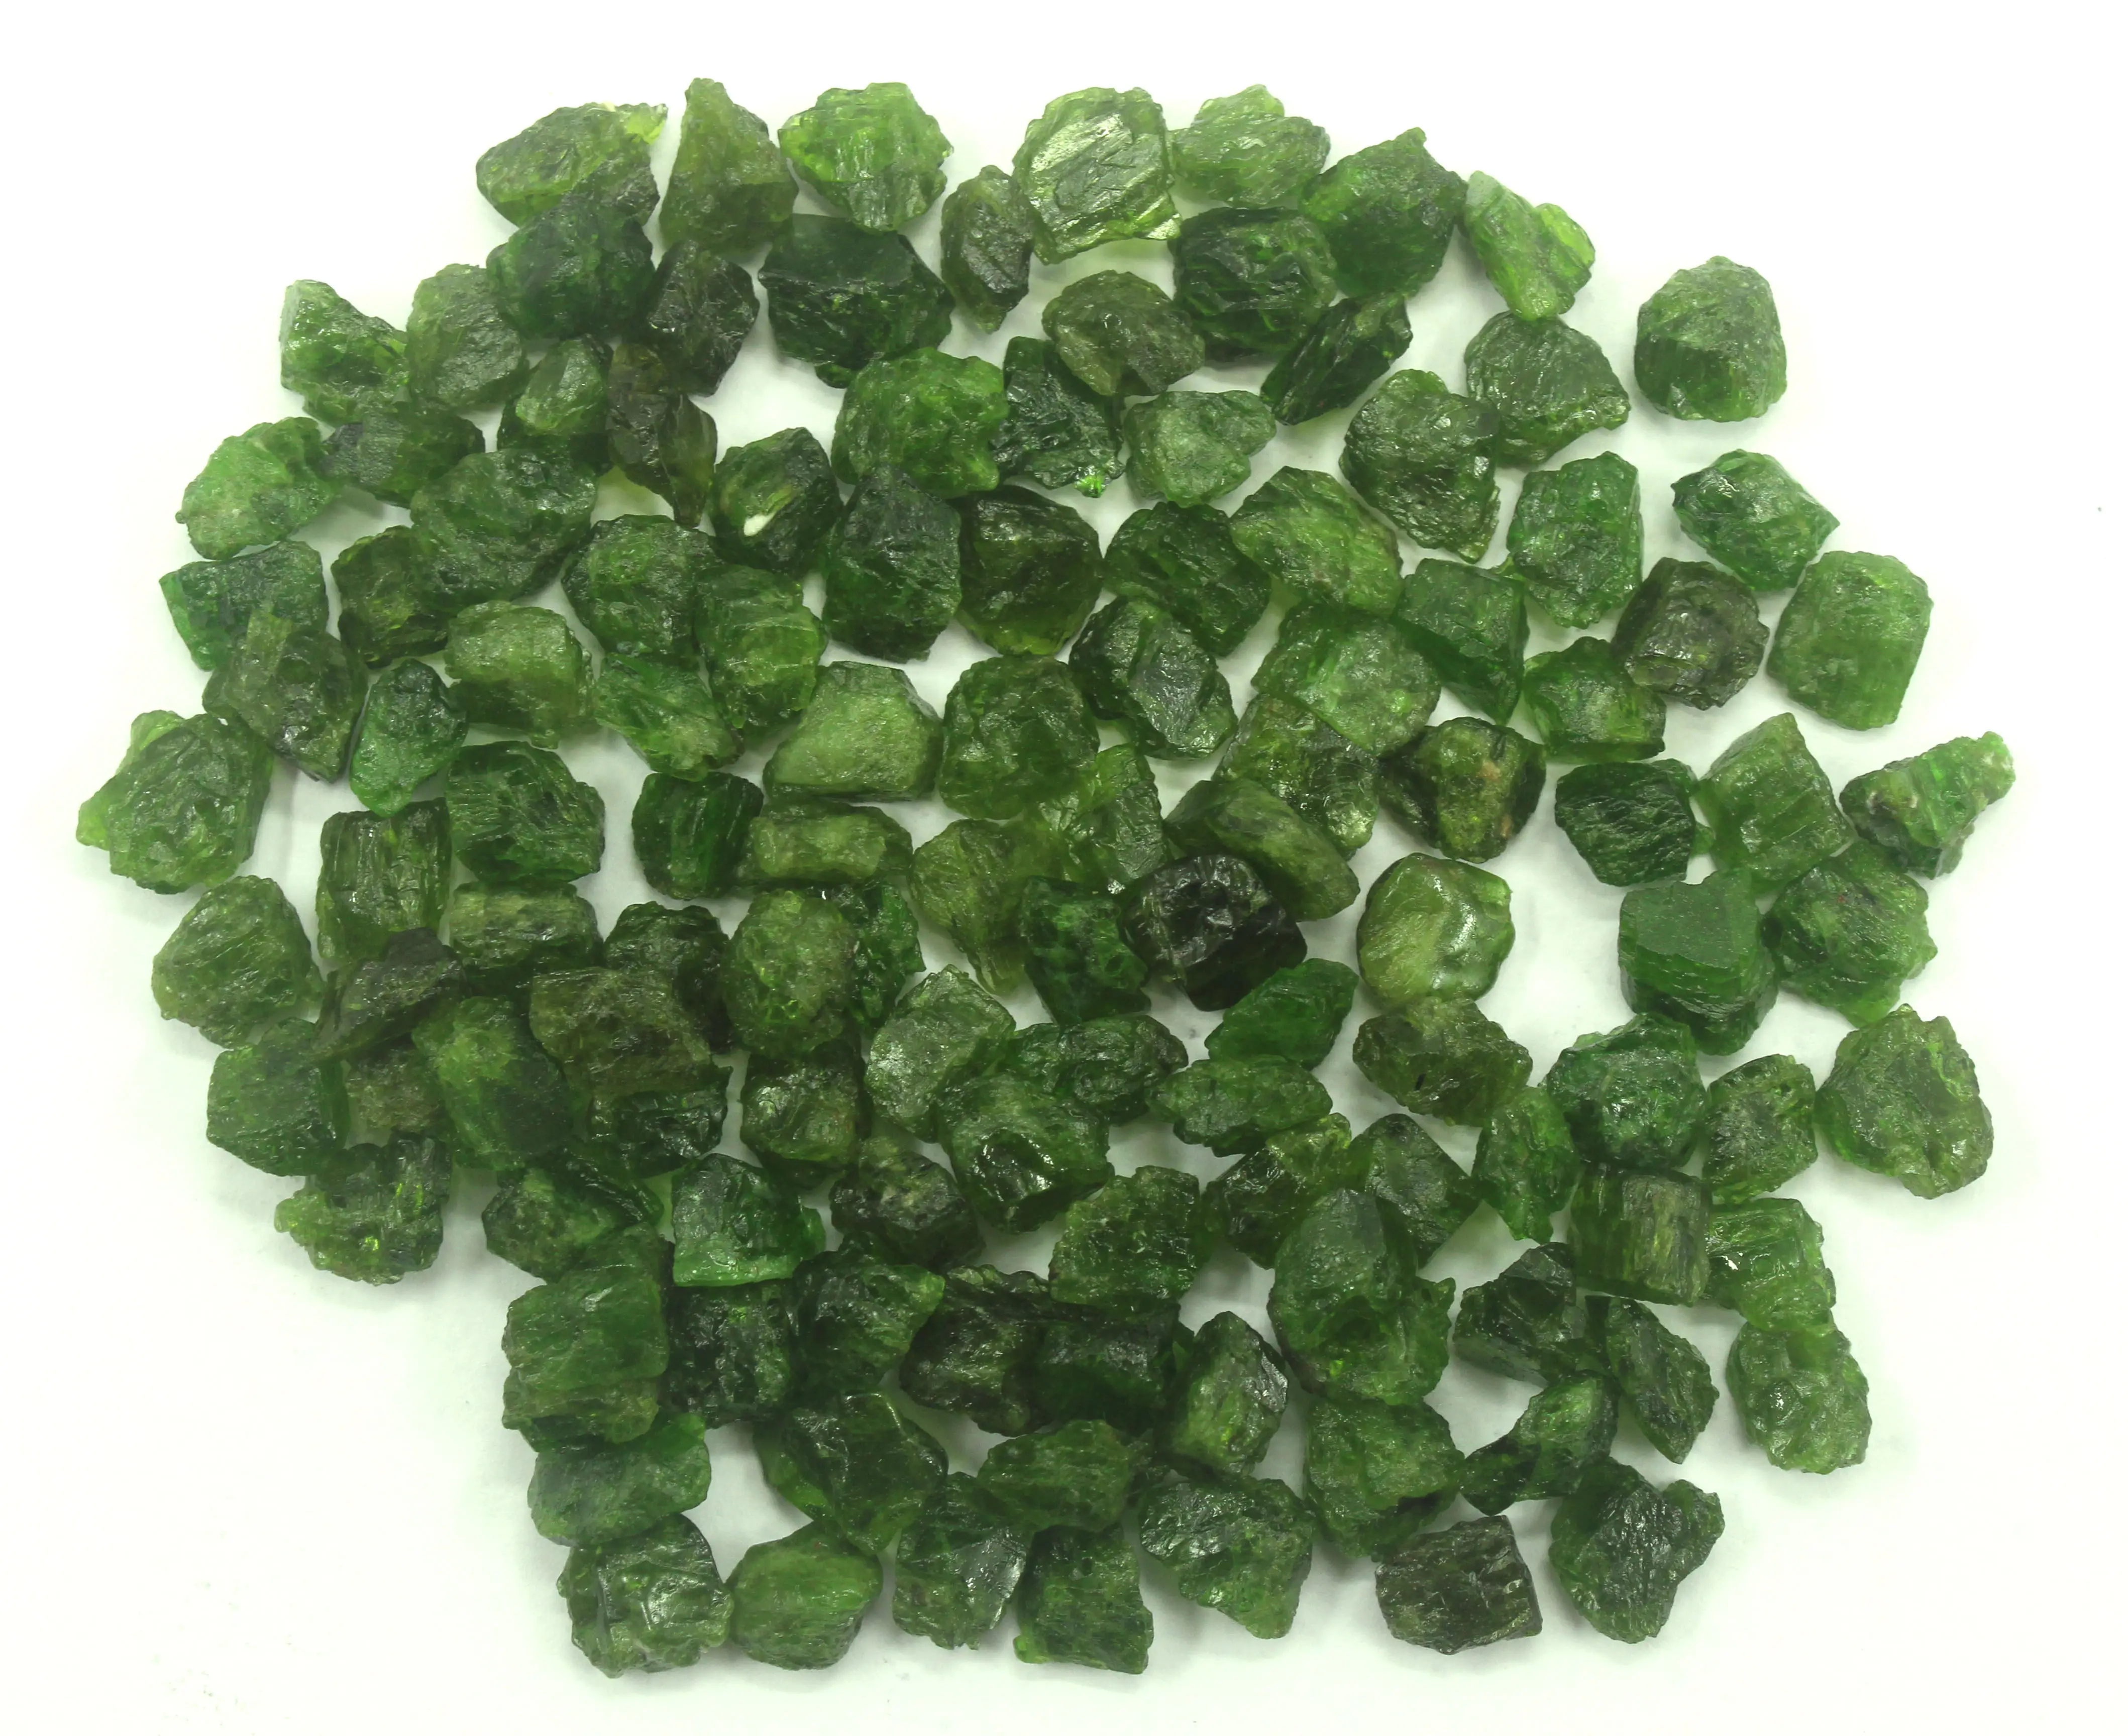 50 Pieces Healing Crystal Natural Green Tourmaline Top Quality Untreated Handcut Gemstone Rough Wholesaler